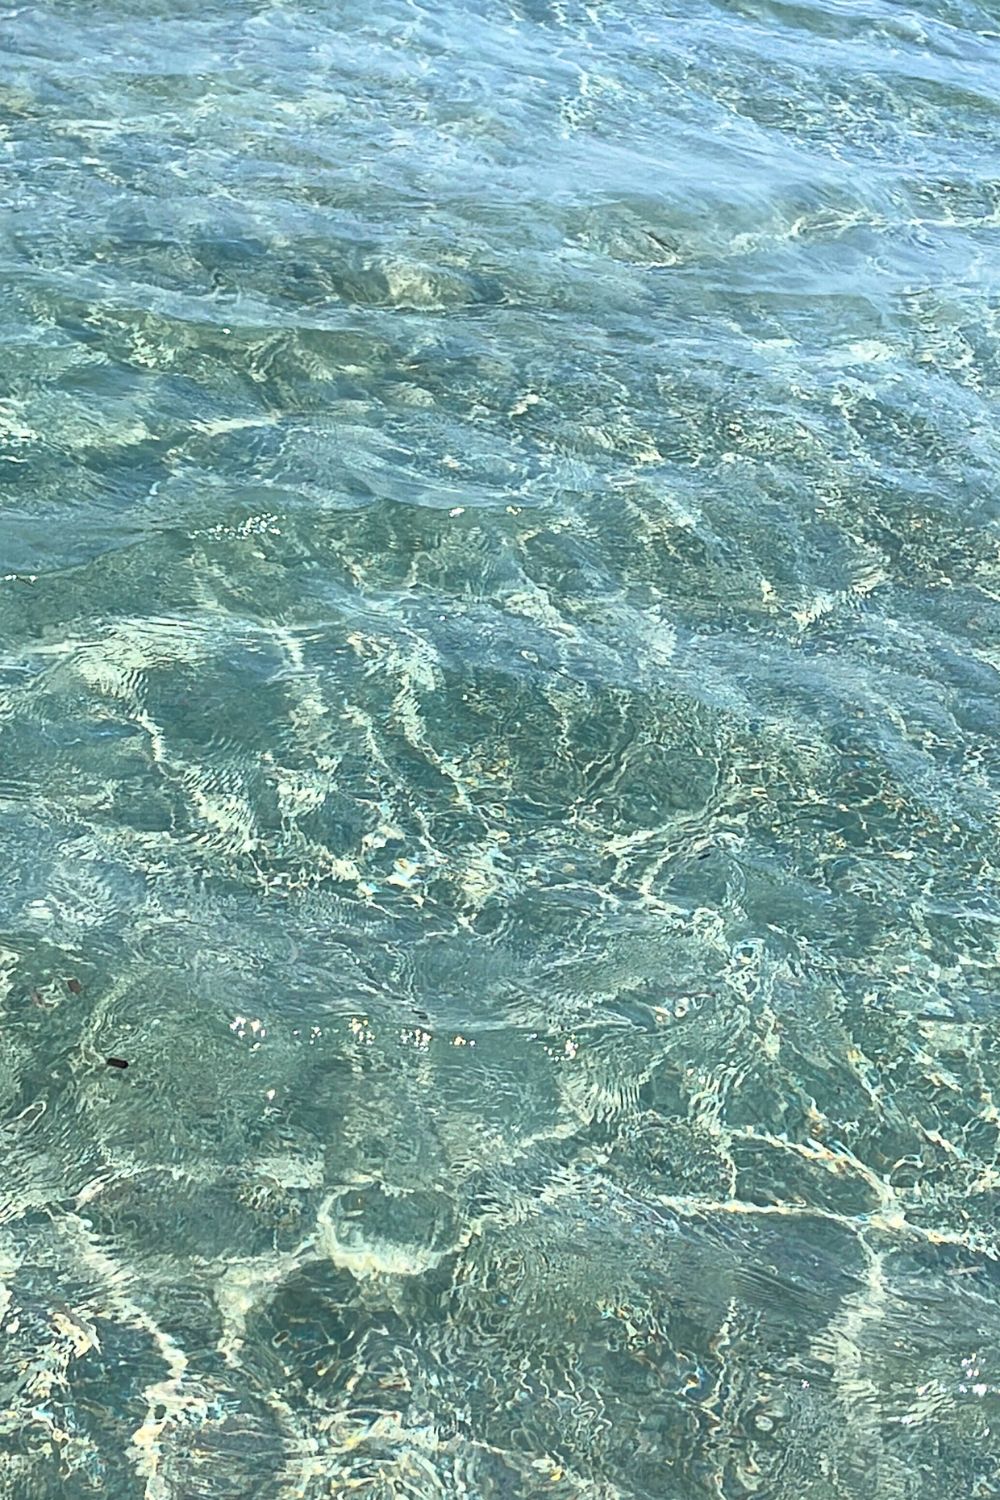 Crystal-clear waters of Faros beach in Sifnos, with visitors enjoying the calm sea and a picturesque hillside in the background.